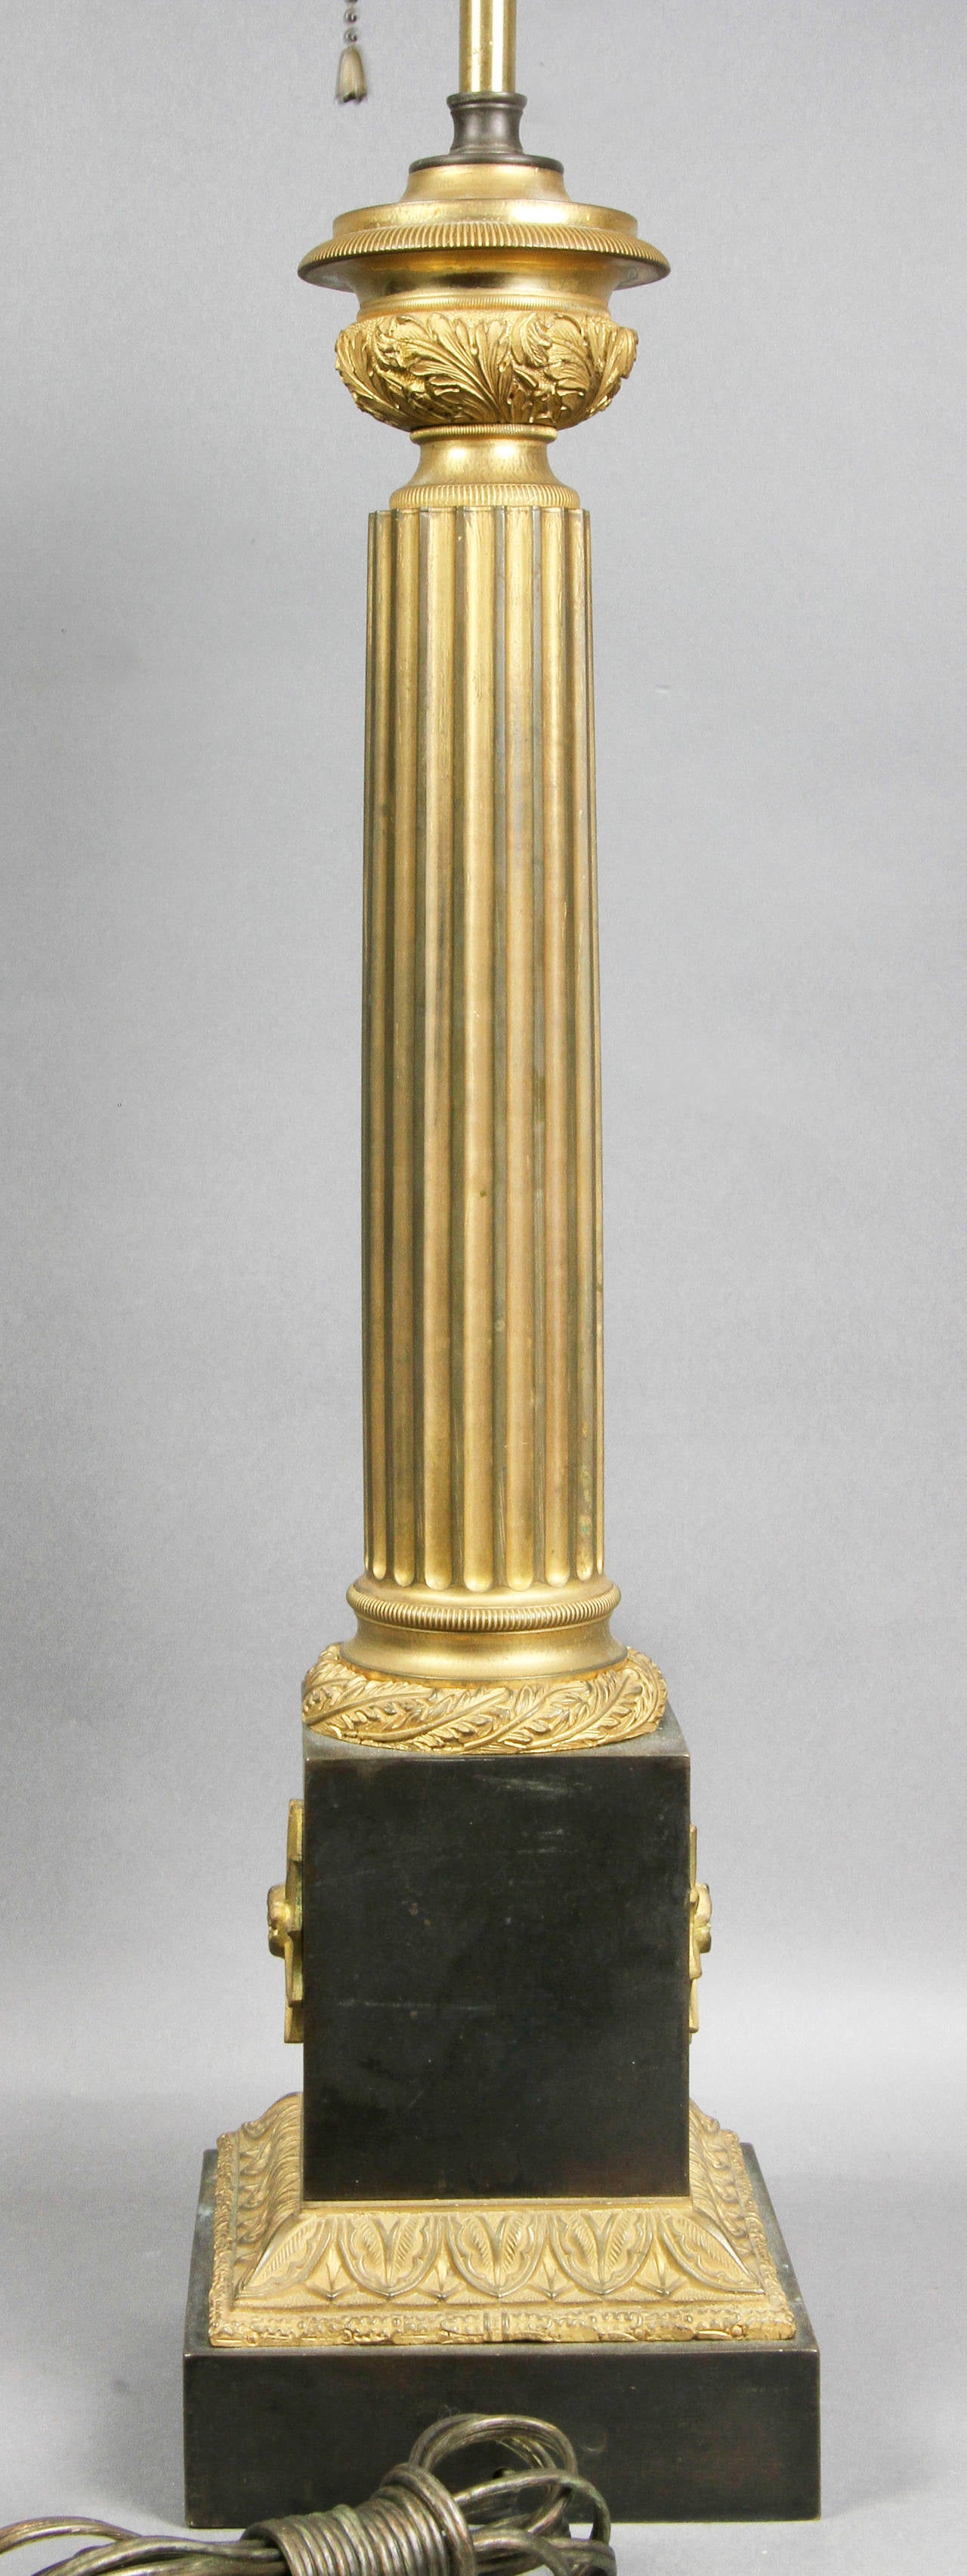 Early 19th Century French Empire Patinated and Gilt Bronze Table Lamp